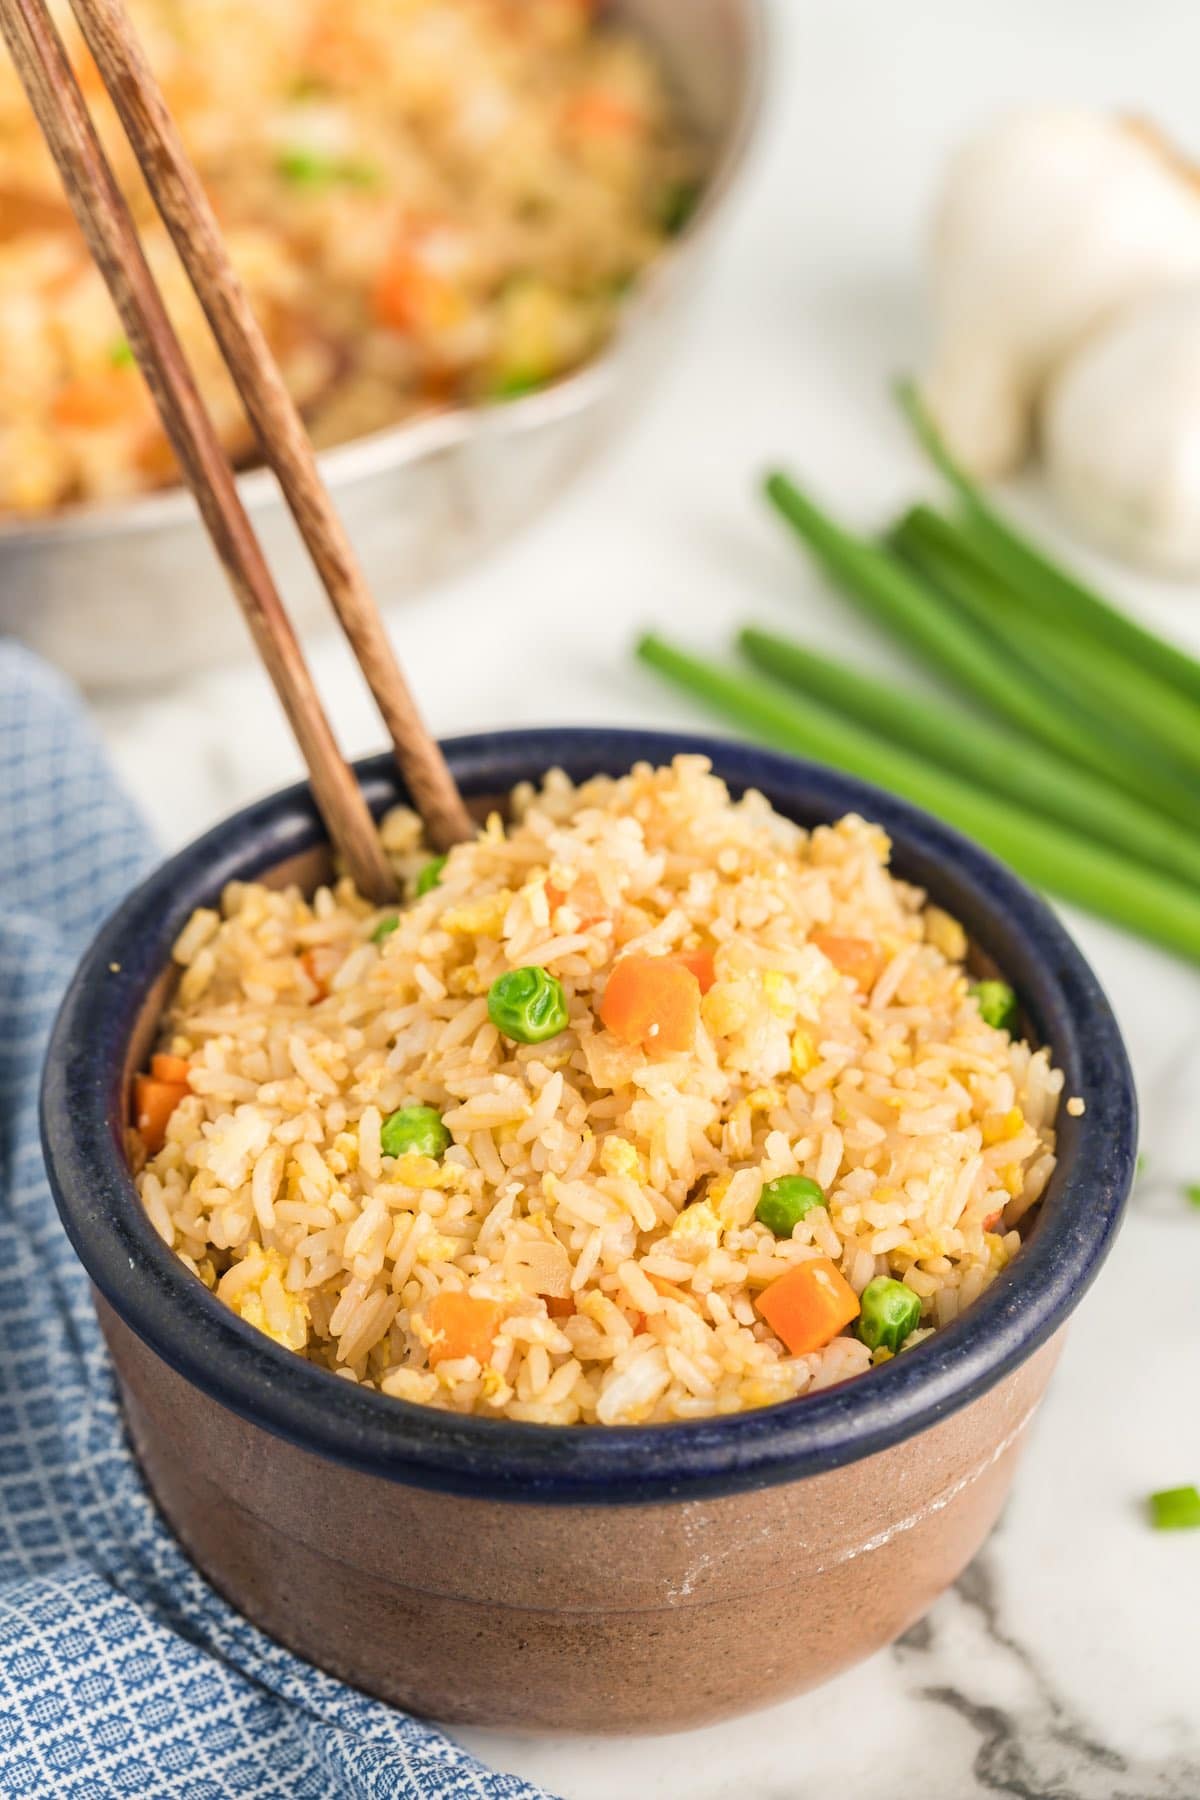 fried rice with egg, carrots and peas in a brown bowl with chopsticks.